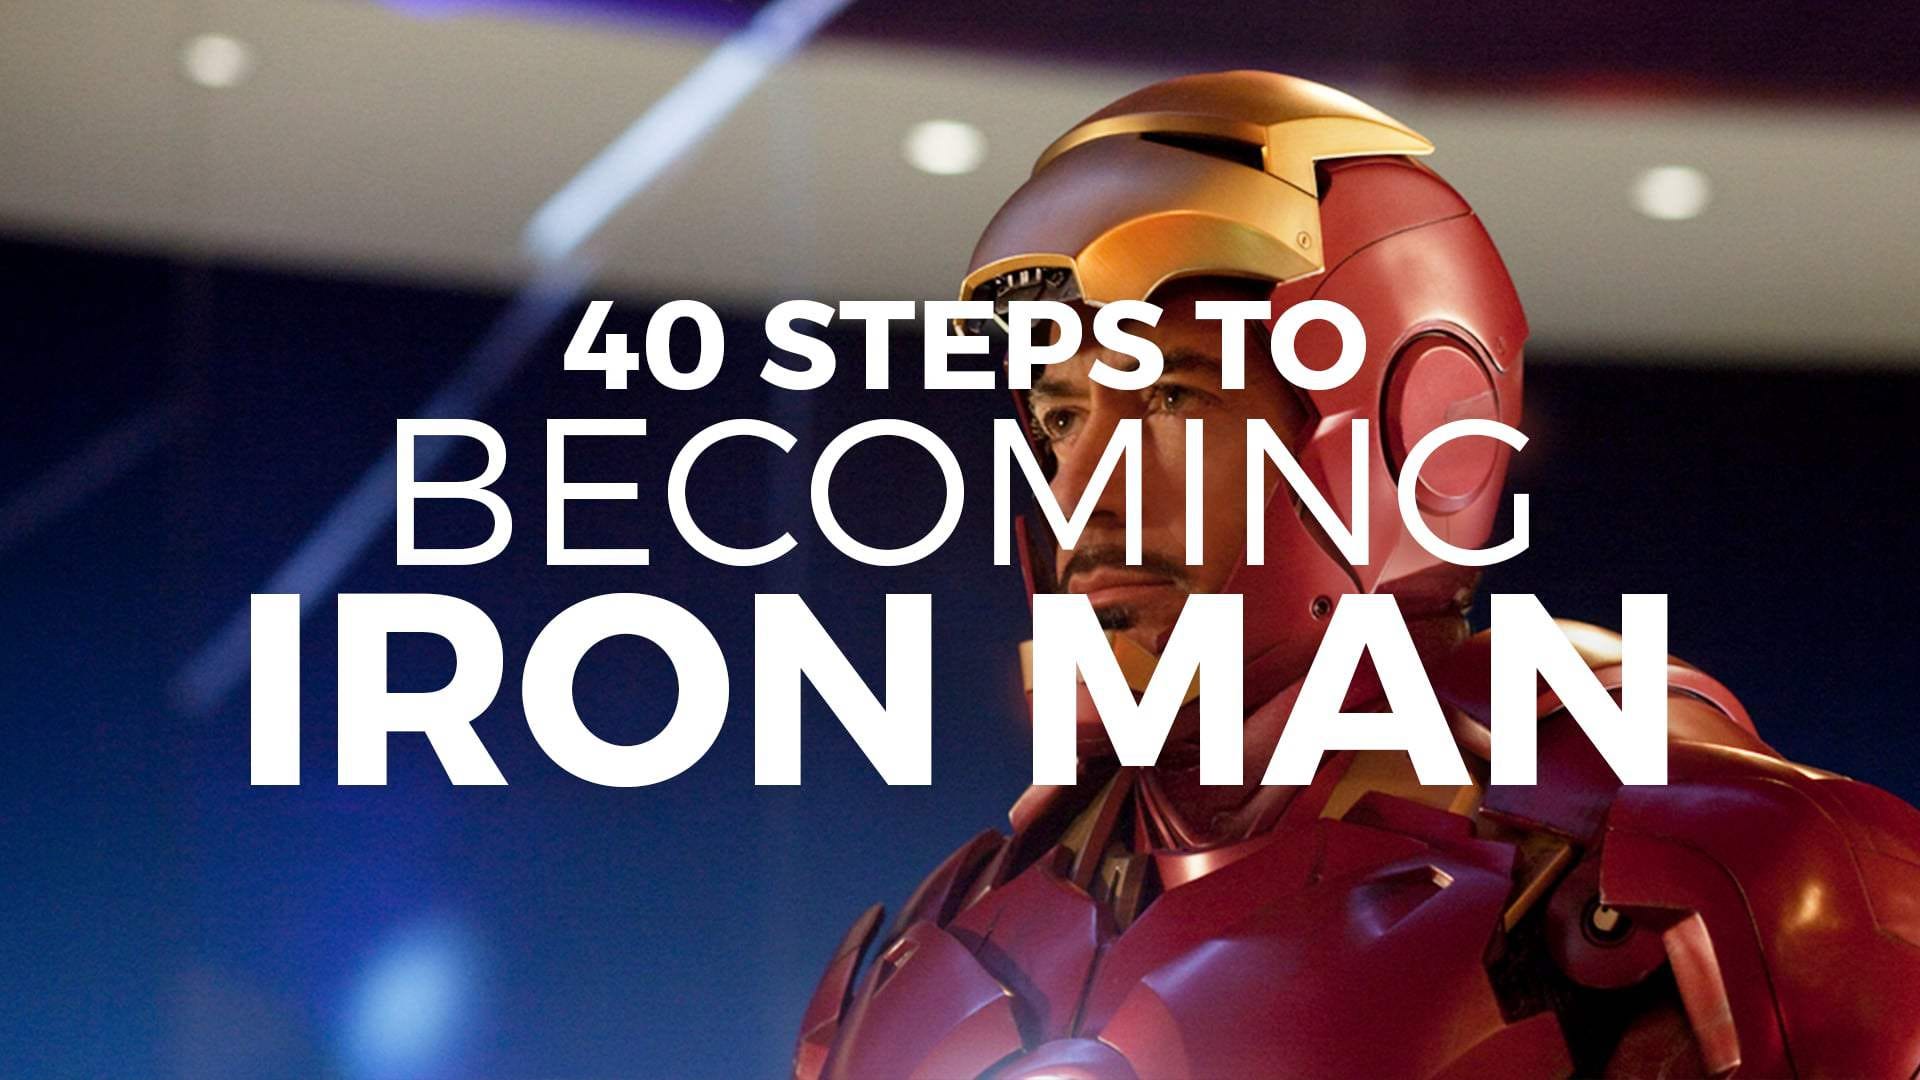 40 Steps to becoming Iron Man in Real Life | by Justin Campbell-Platt |  Medium